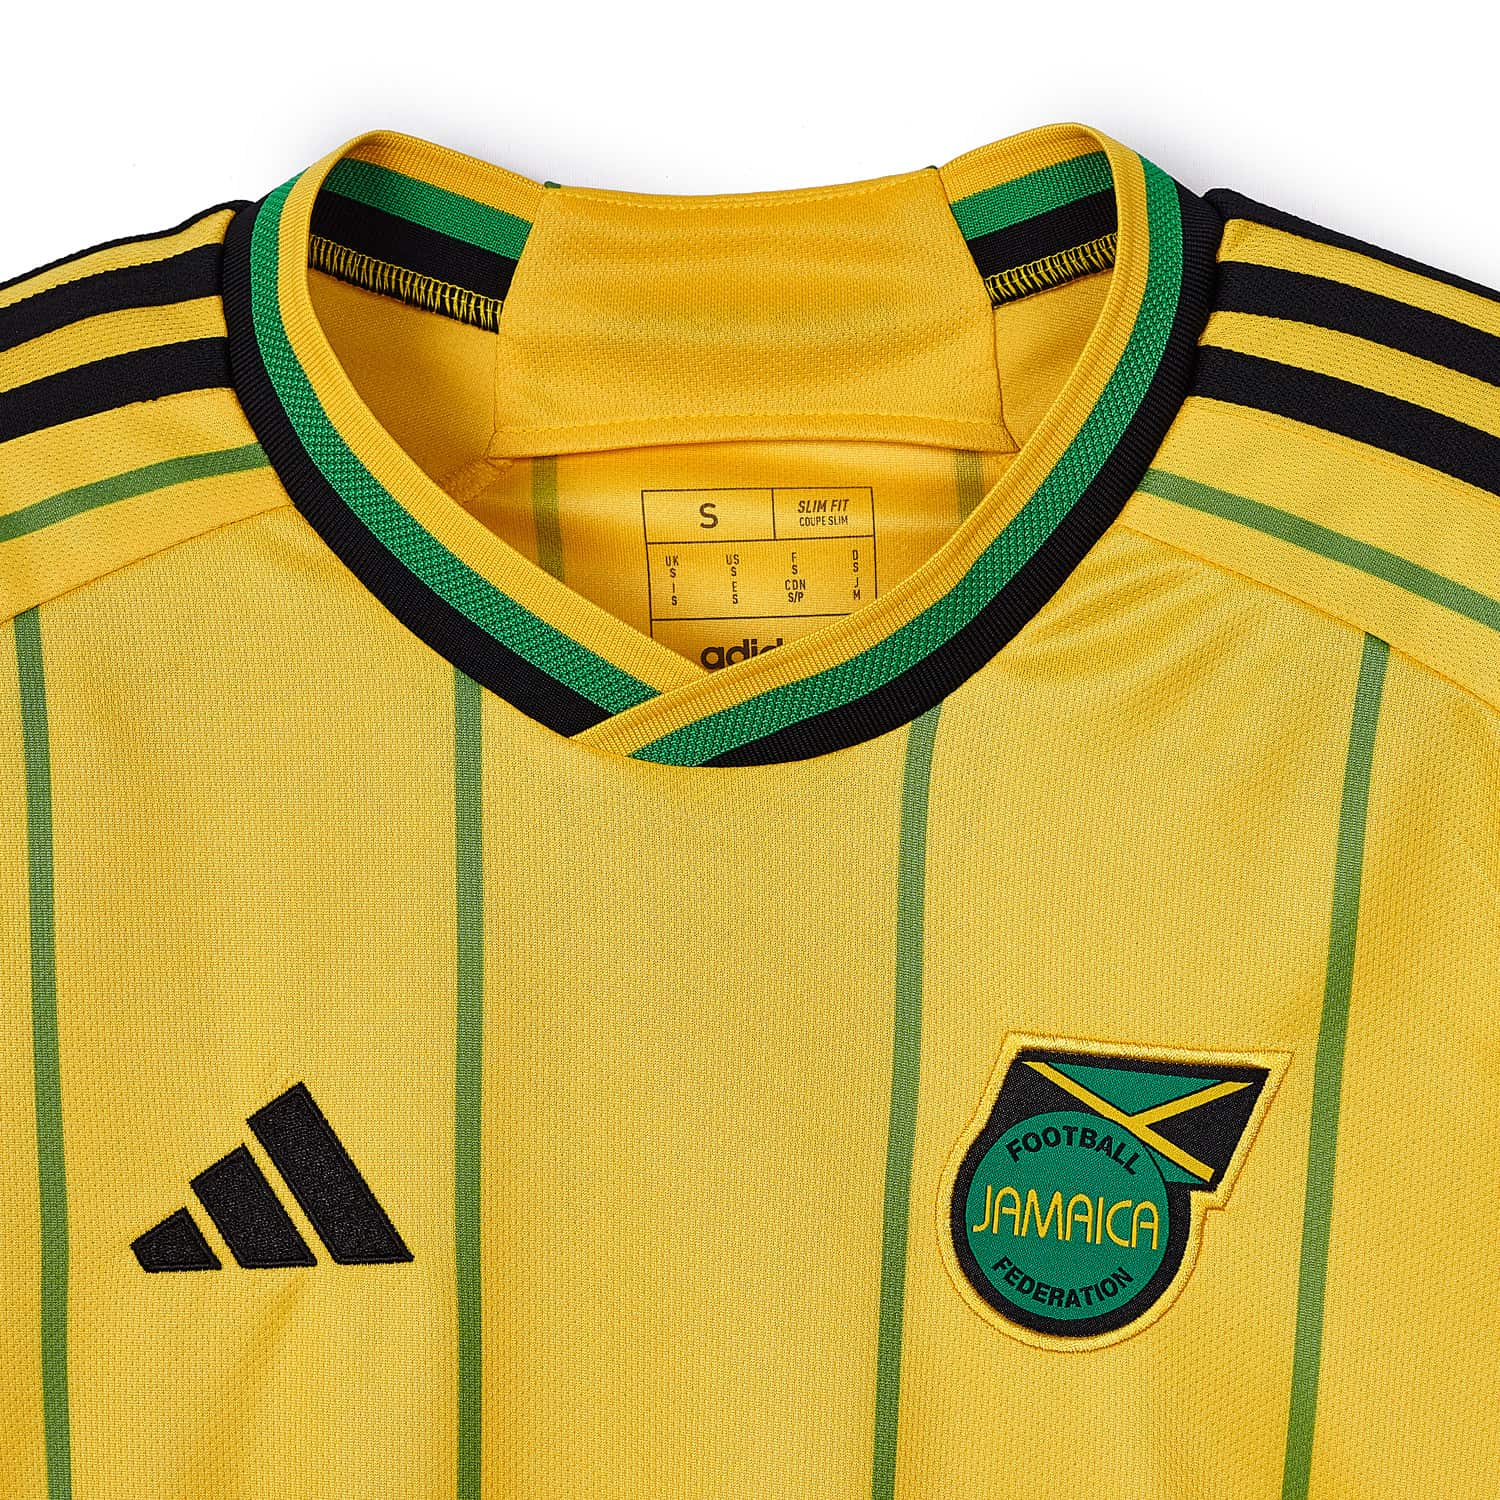 Official Jamaica Football Shirts & Kits - Official FIFA Store